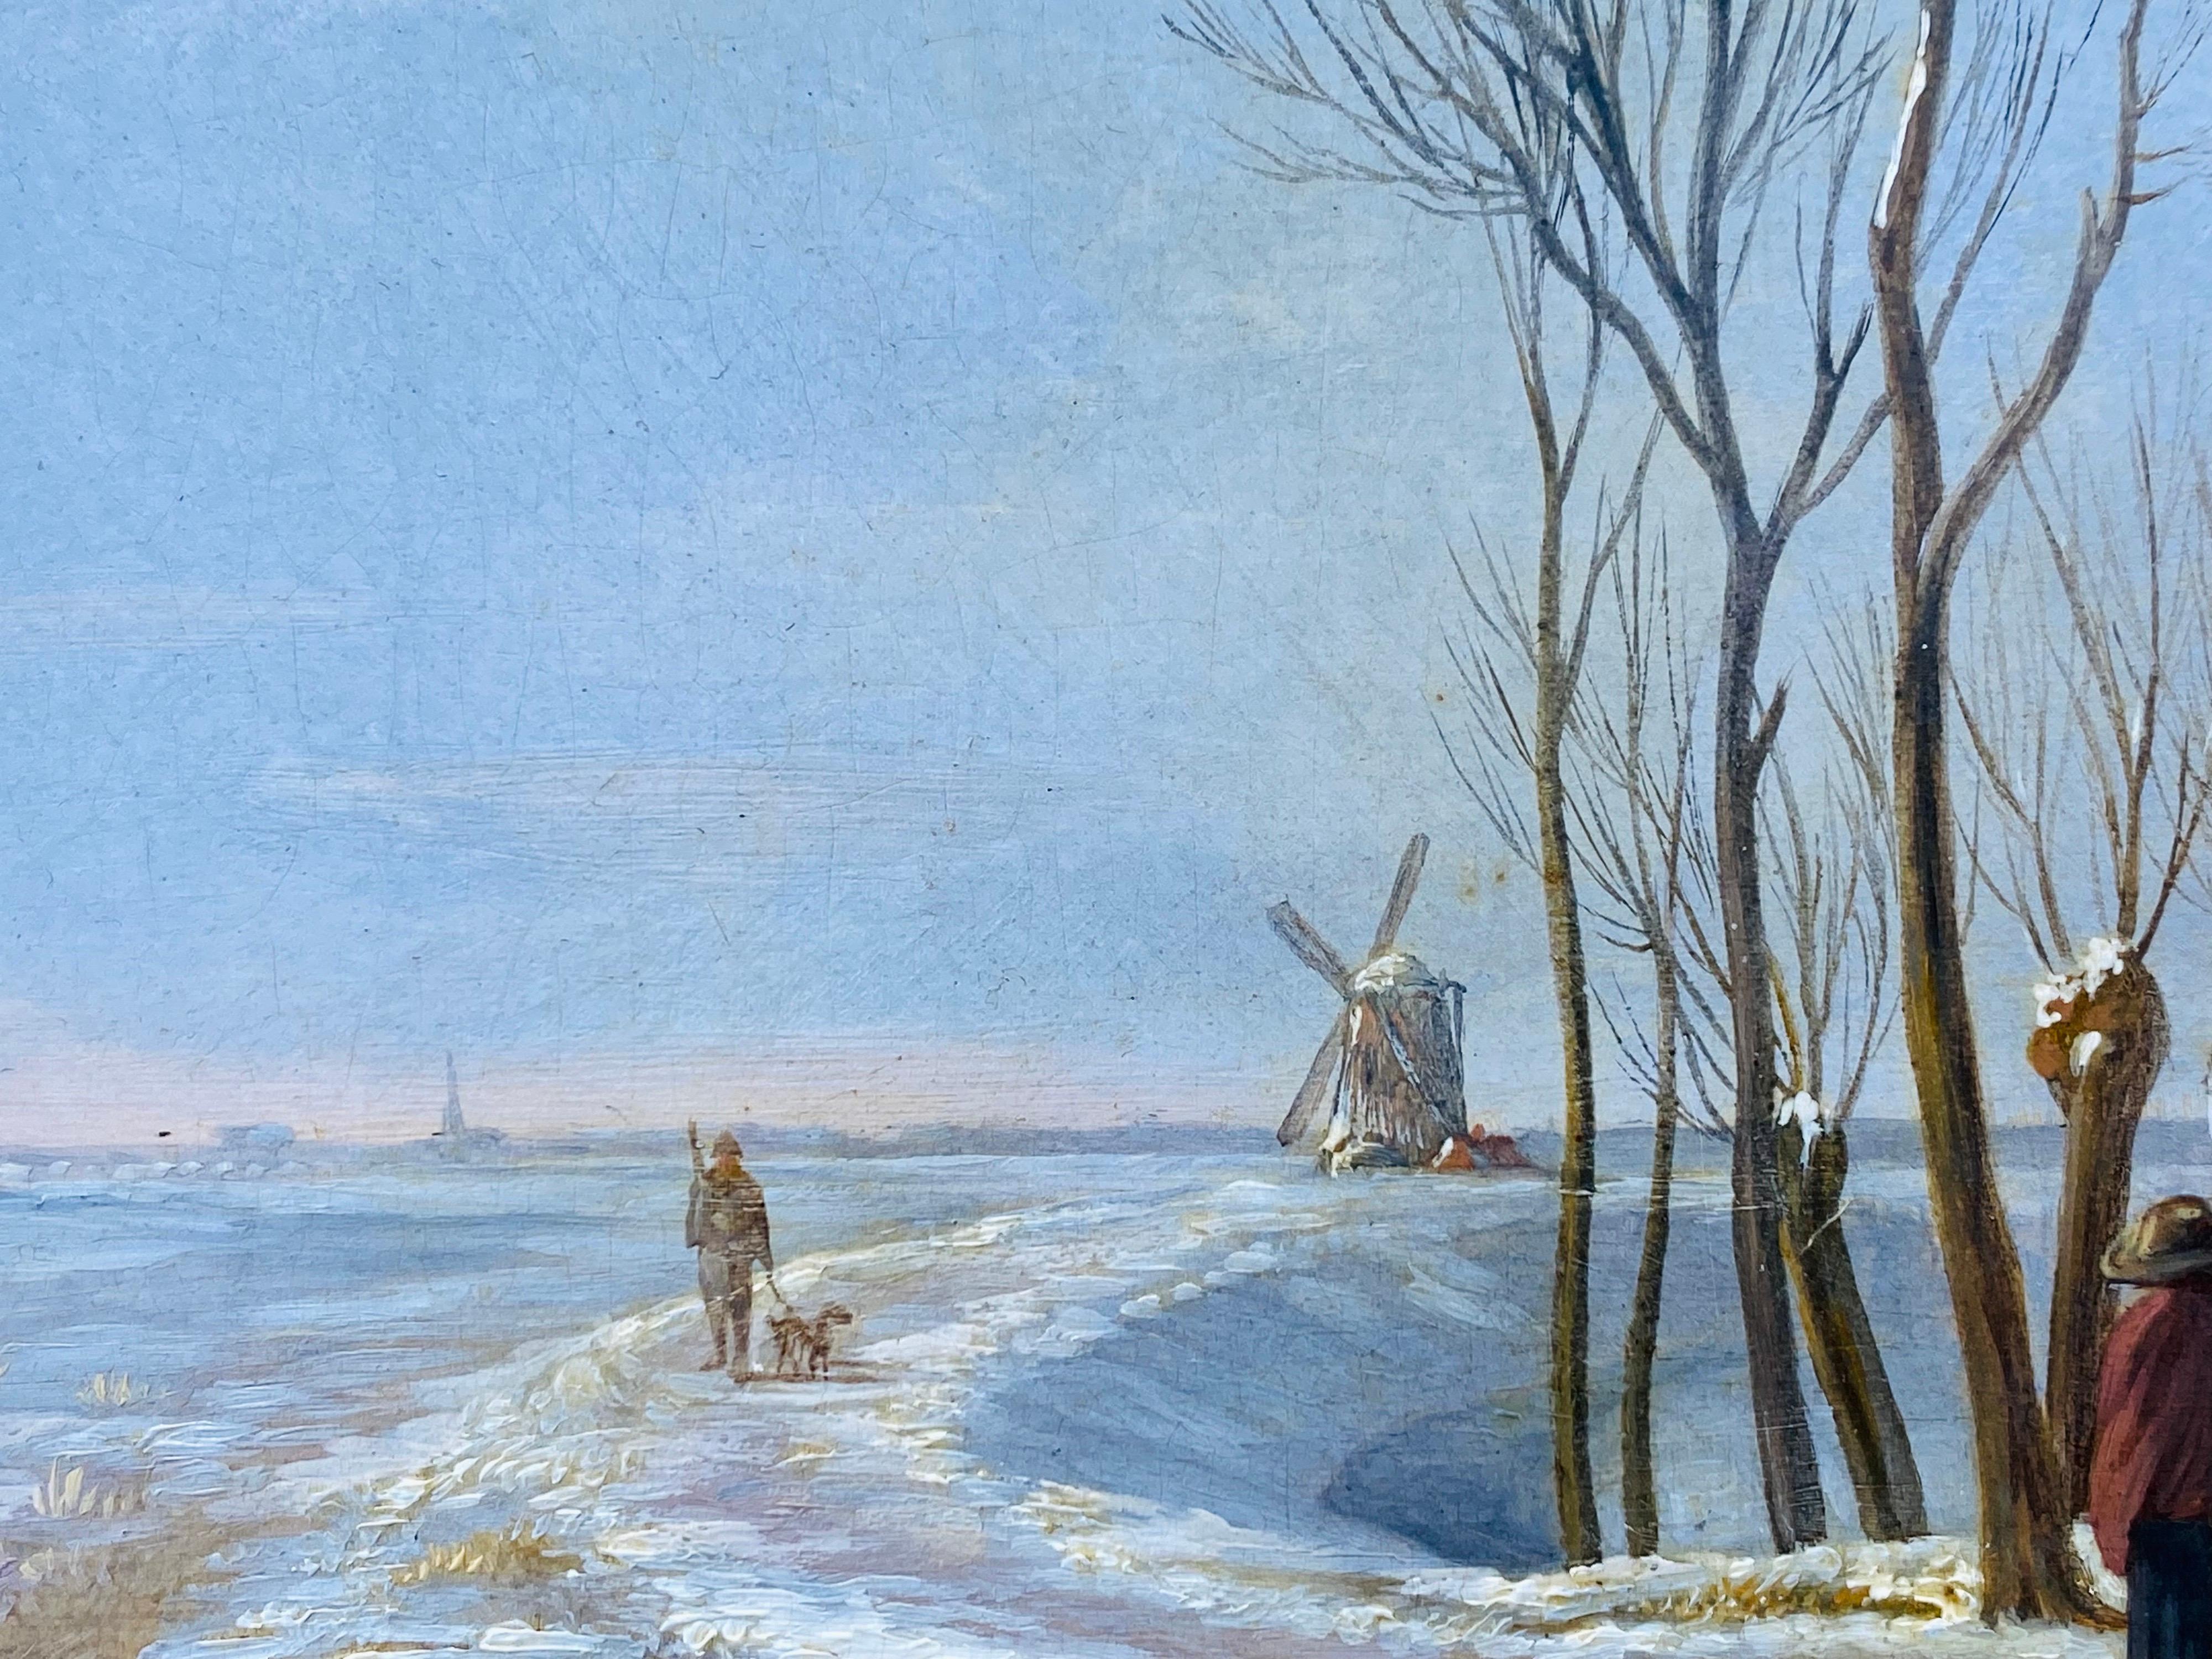 19th century romantic dutch oil painting of a winter landscape

The present painting wonderfully captures a sunny winter day in the 19th century. To the right we can see a man with his horse and carriage, while in the distance we can see people